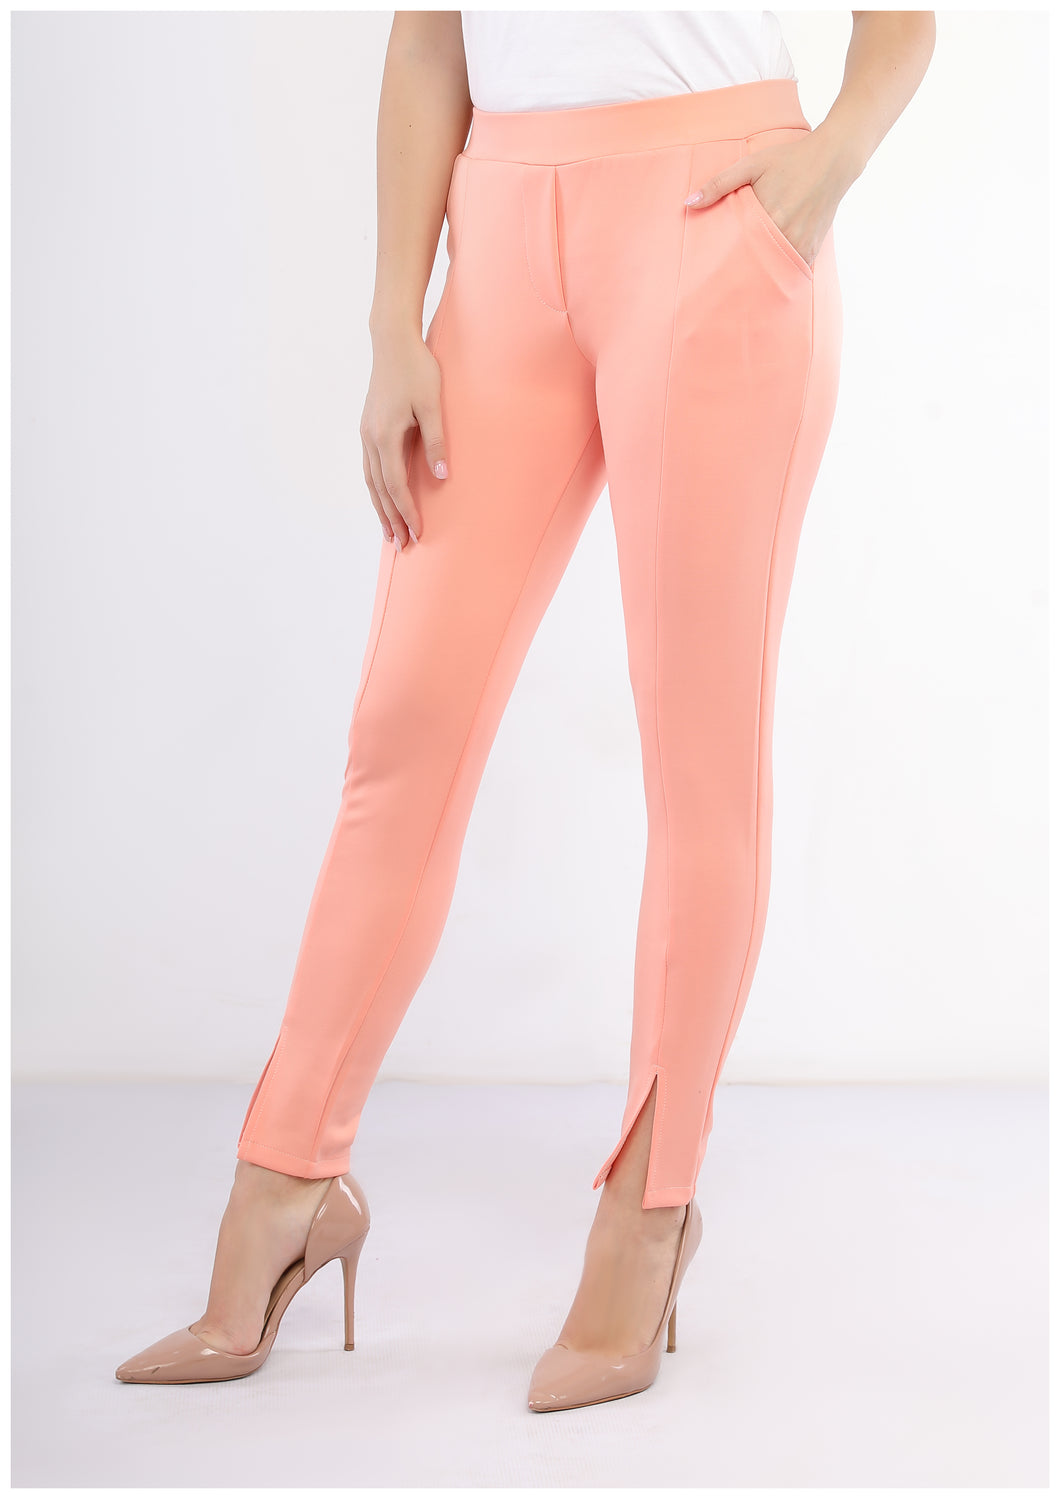 Pants, polyester, salmon-colored